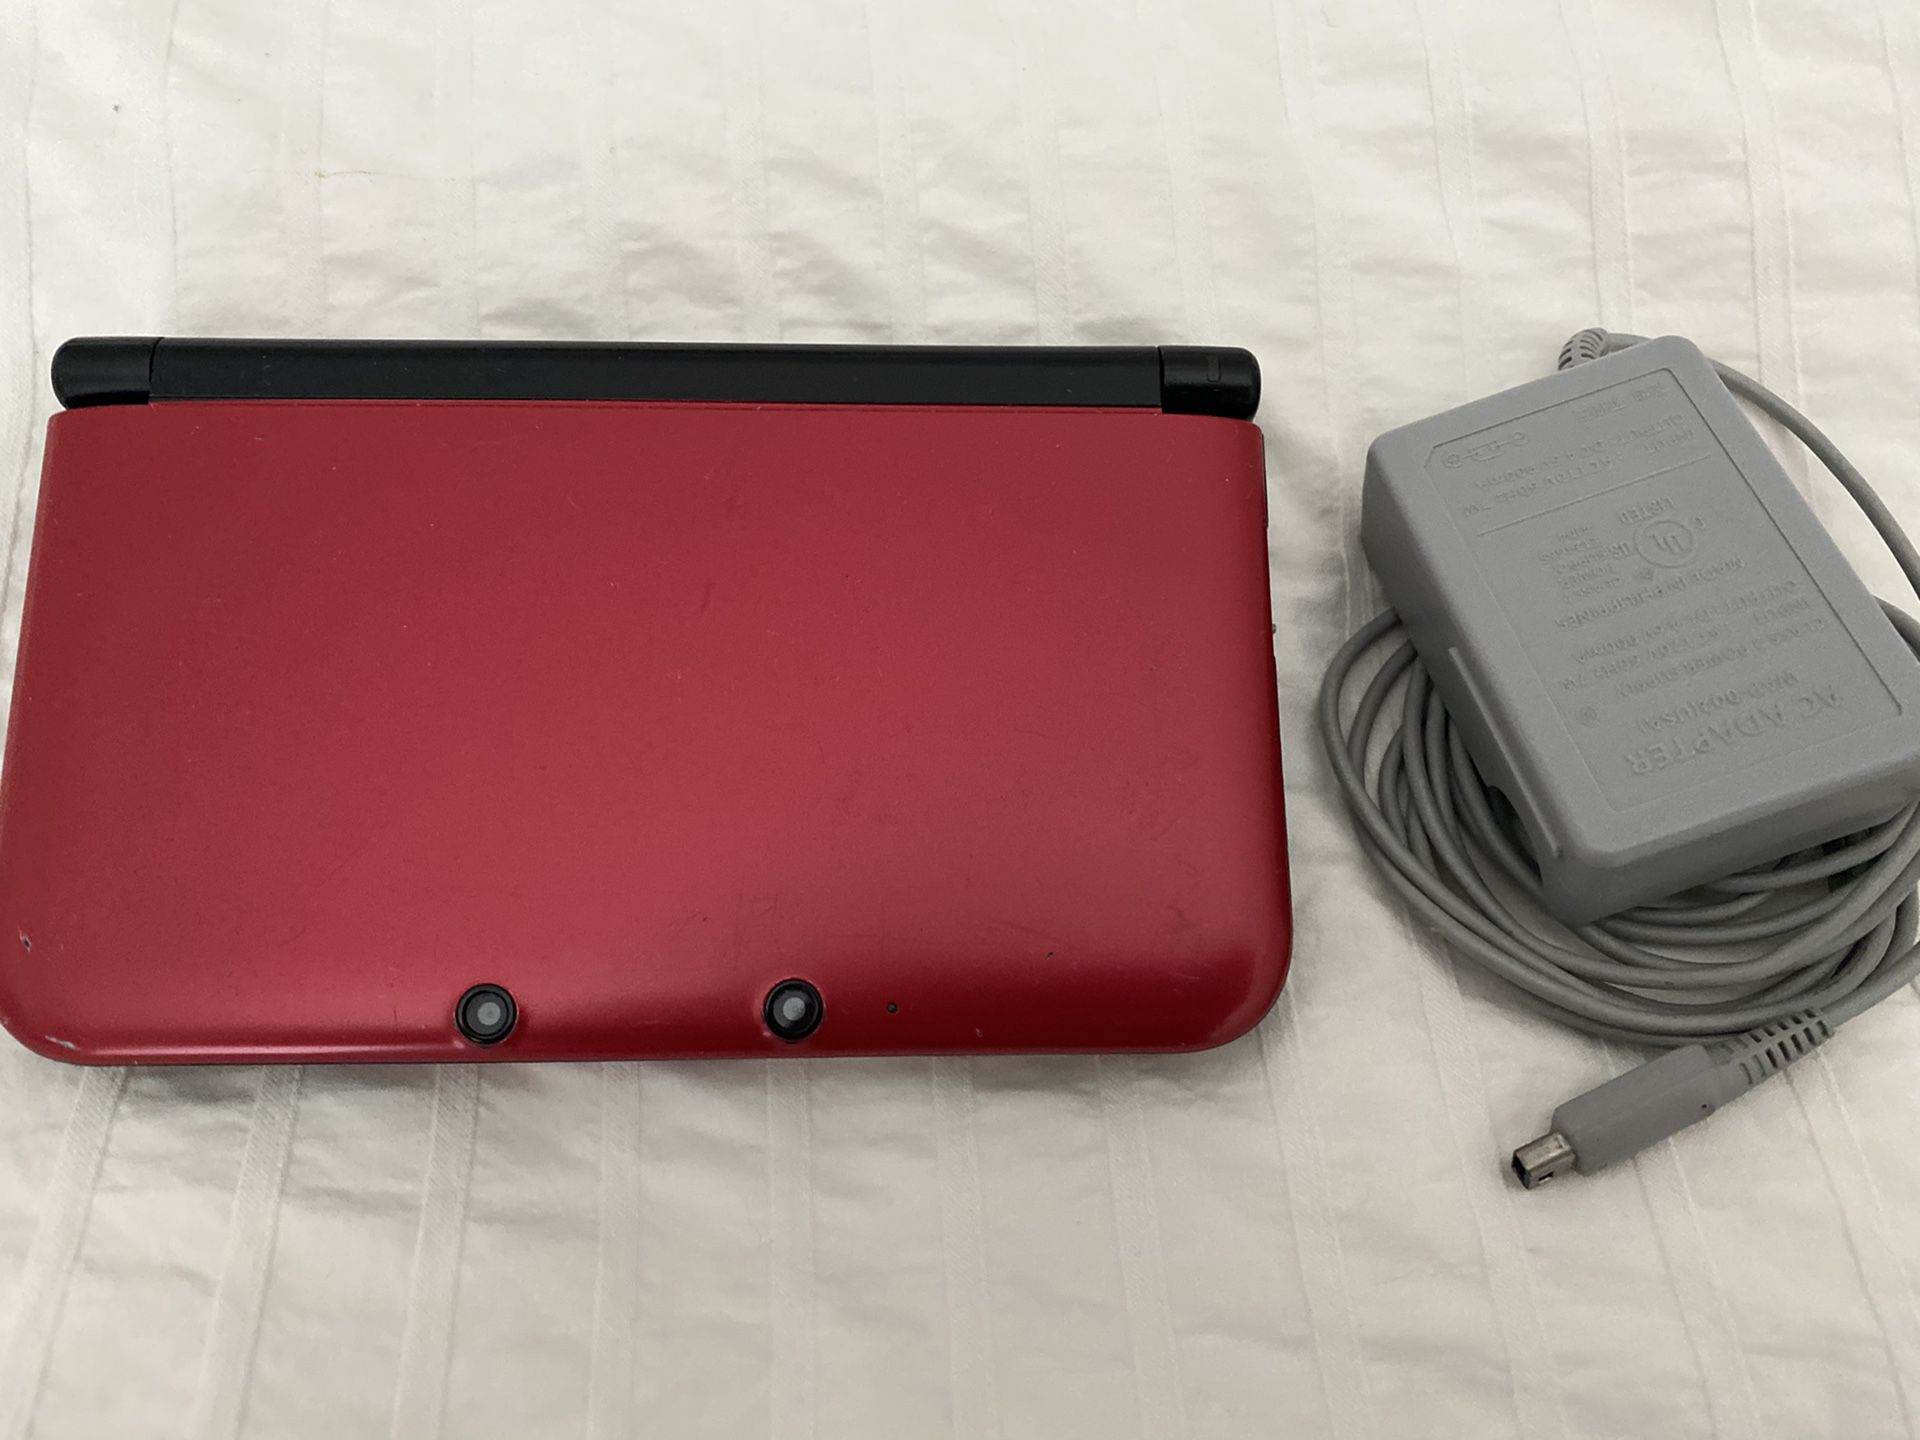 Nintendo 3DS XL red